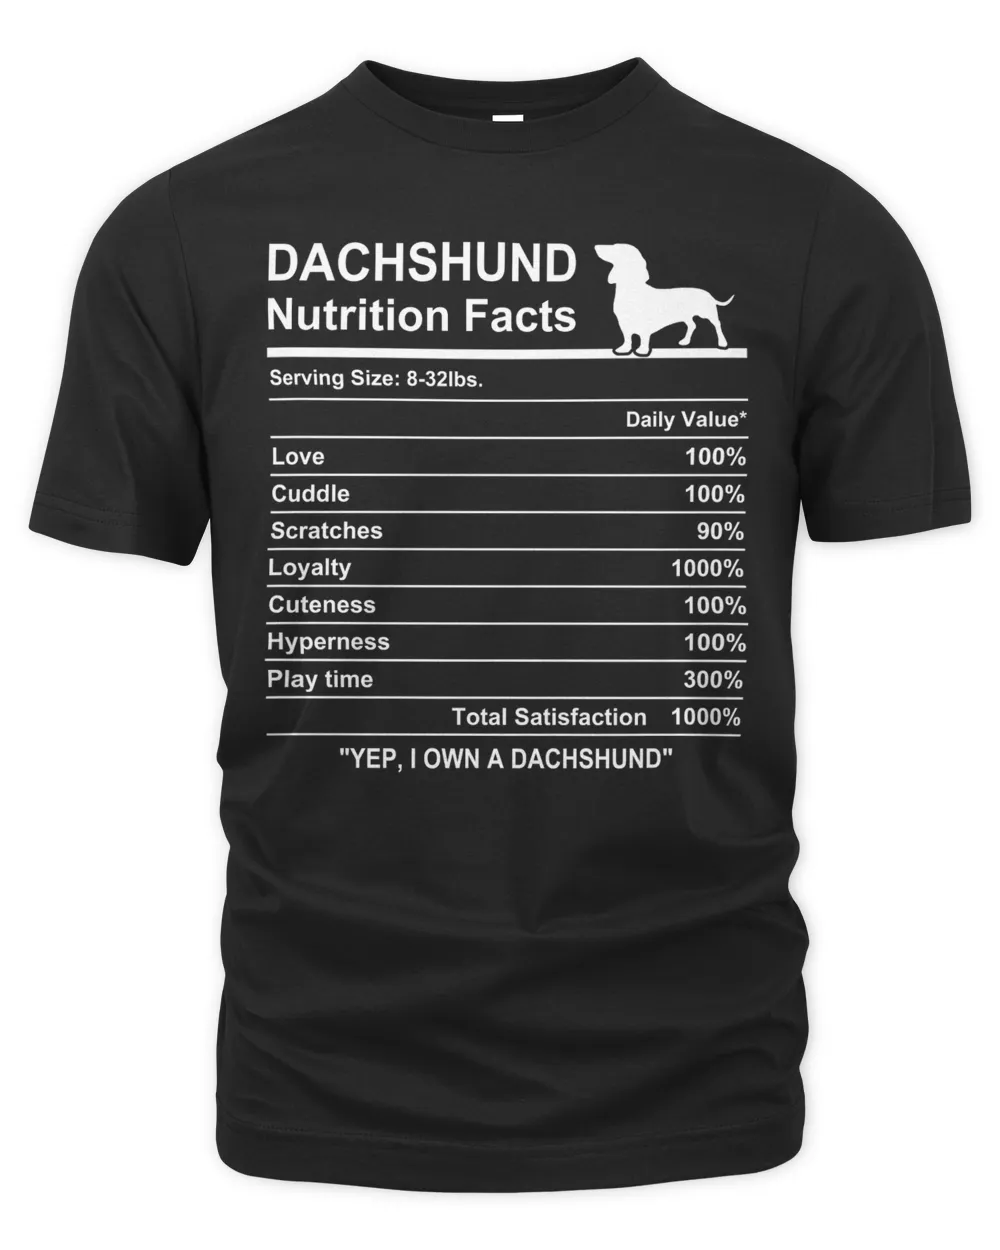 Dachshund Nutrition Facts